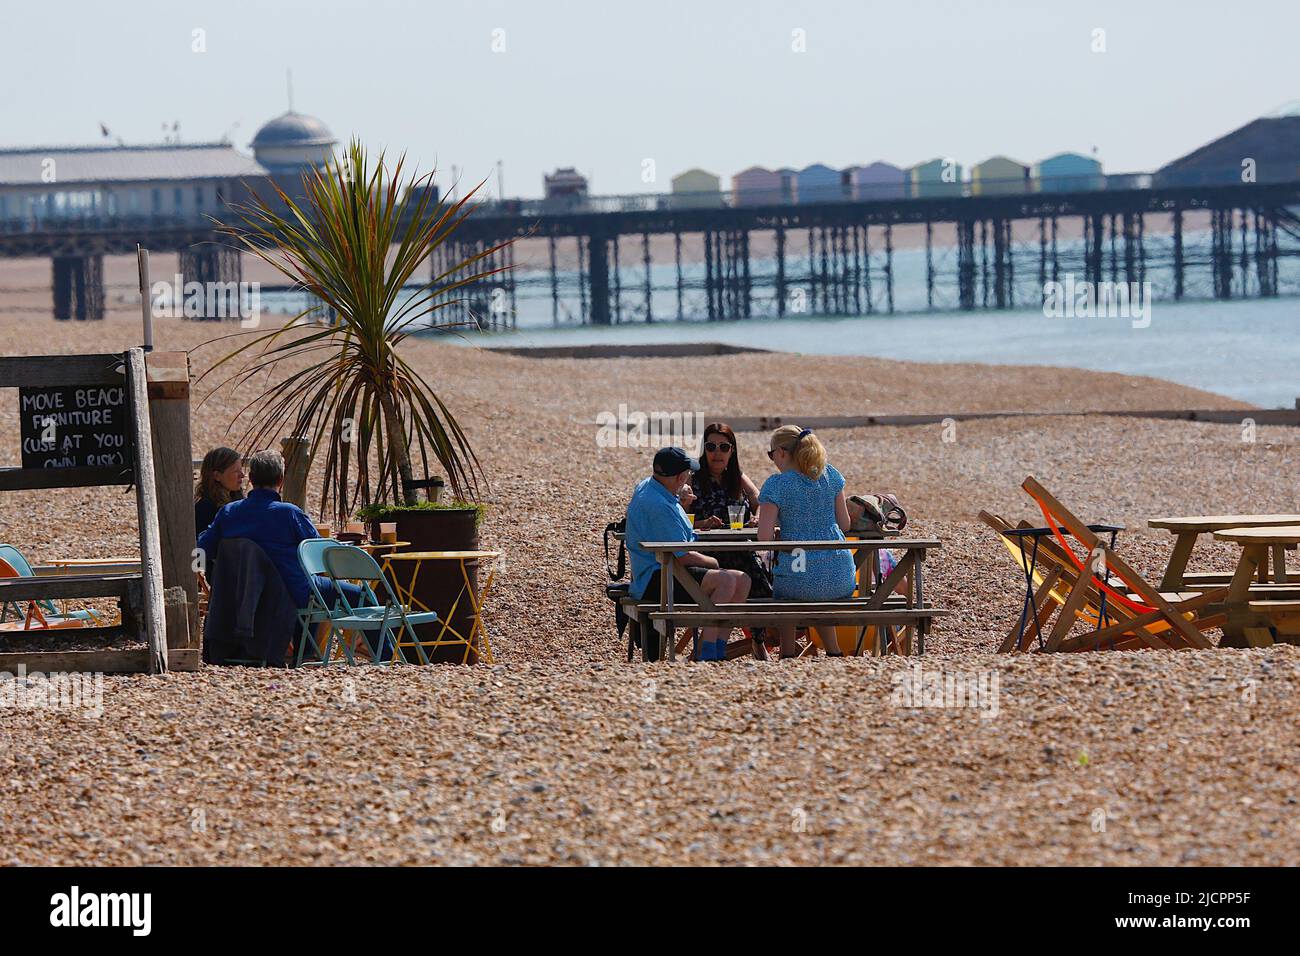 Hastings, East Sussex, UK. 15 Jun, 2022. UK Weather: Hot and sunny at the seaside town of Hastings in East Sussex as Brits enjoy the warm weather today along the seafront. Photo Credit: Paul Lawrenson /Alamy Live News Stock Photo